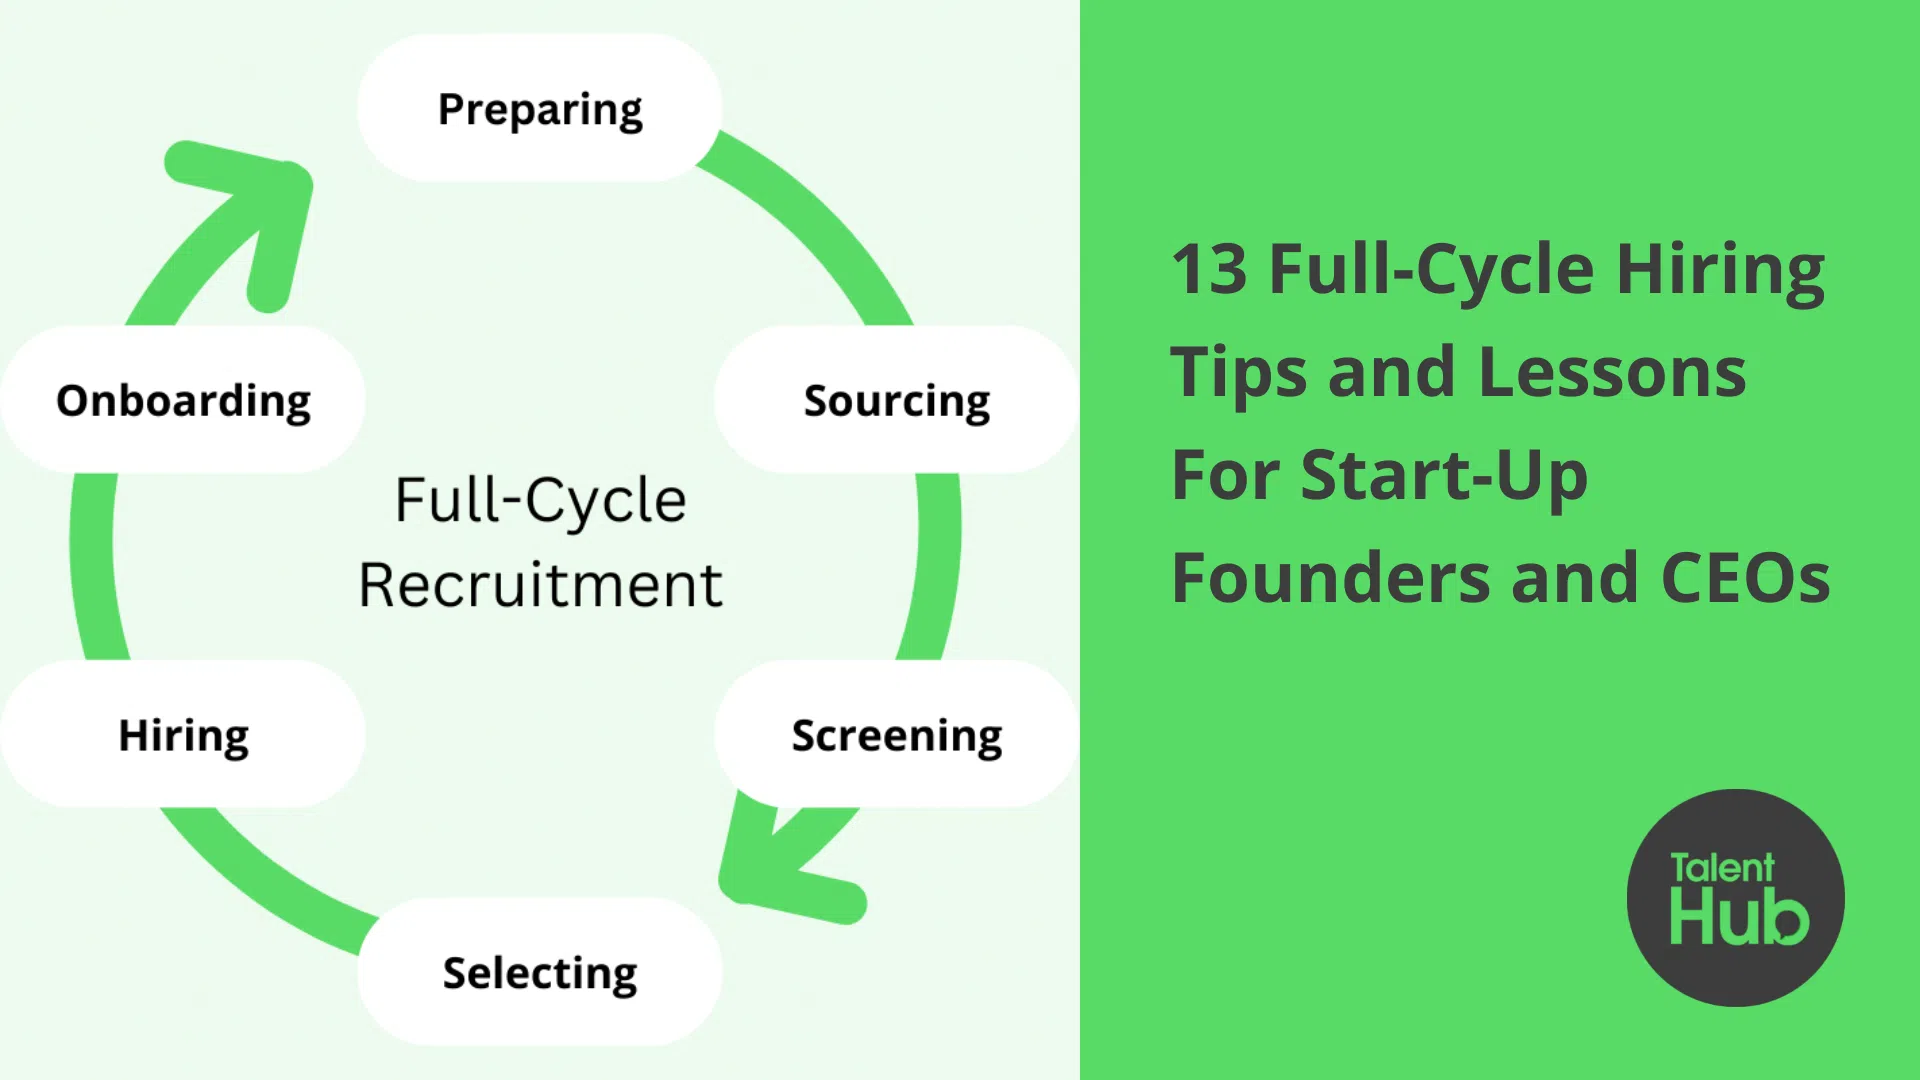 13 Full-Cycle Hiring Tips and Lessons For Start-Up Founders and CEOs